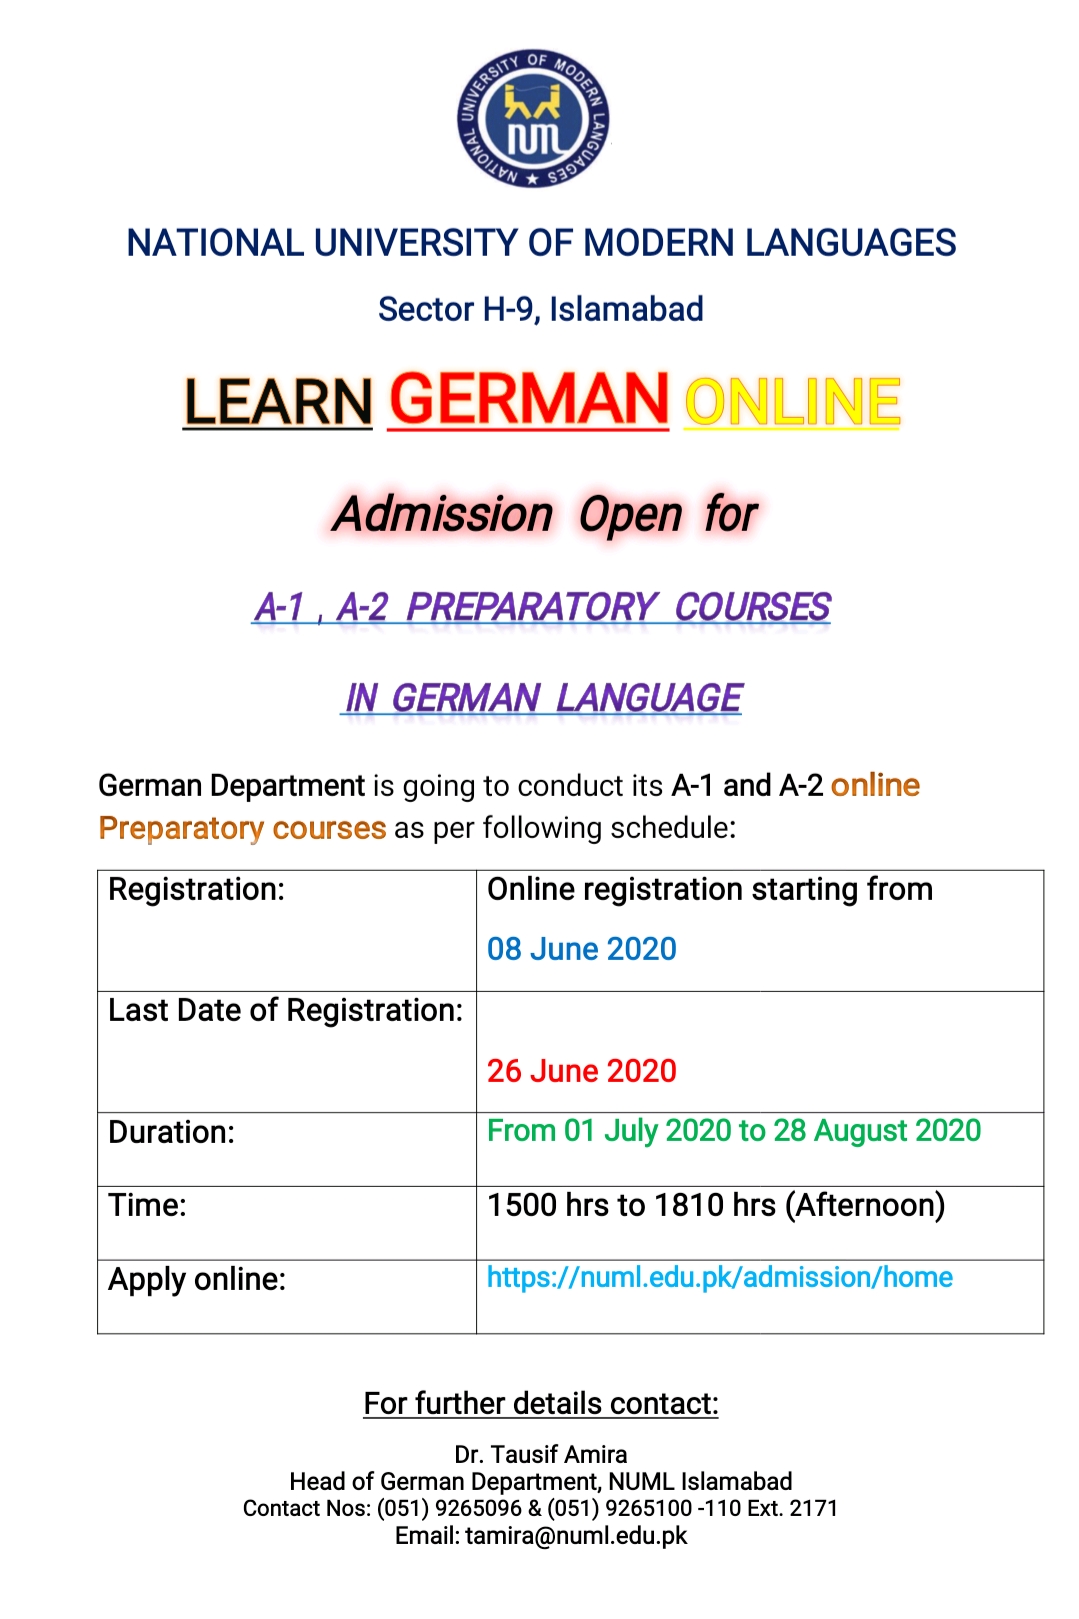 ADMISSION OPEN For A1, A2  Online Preparatory courses in German Language